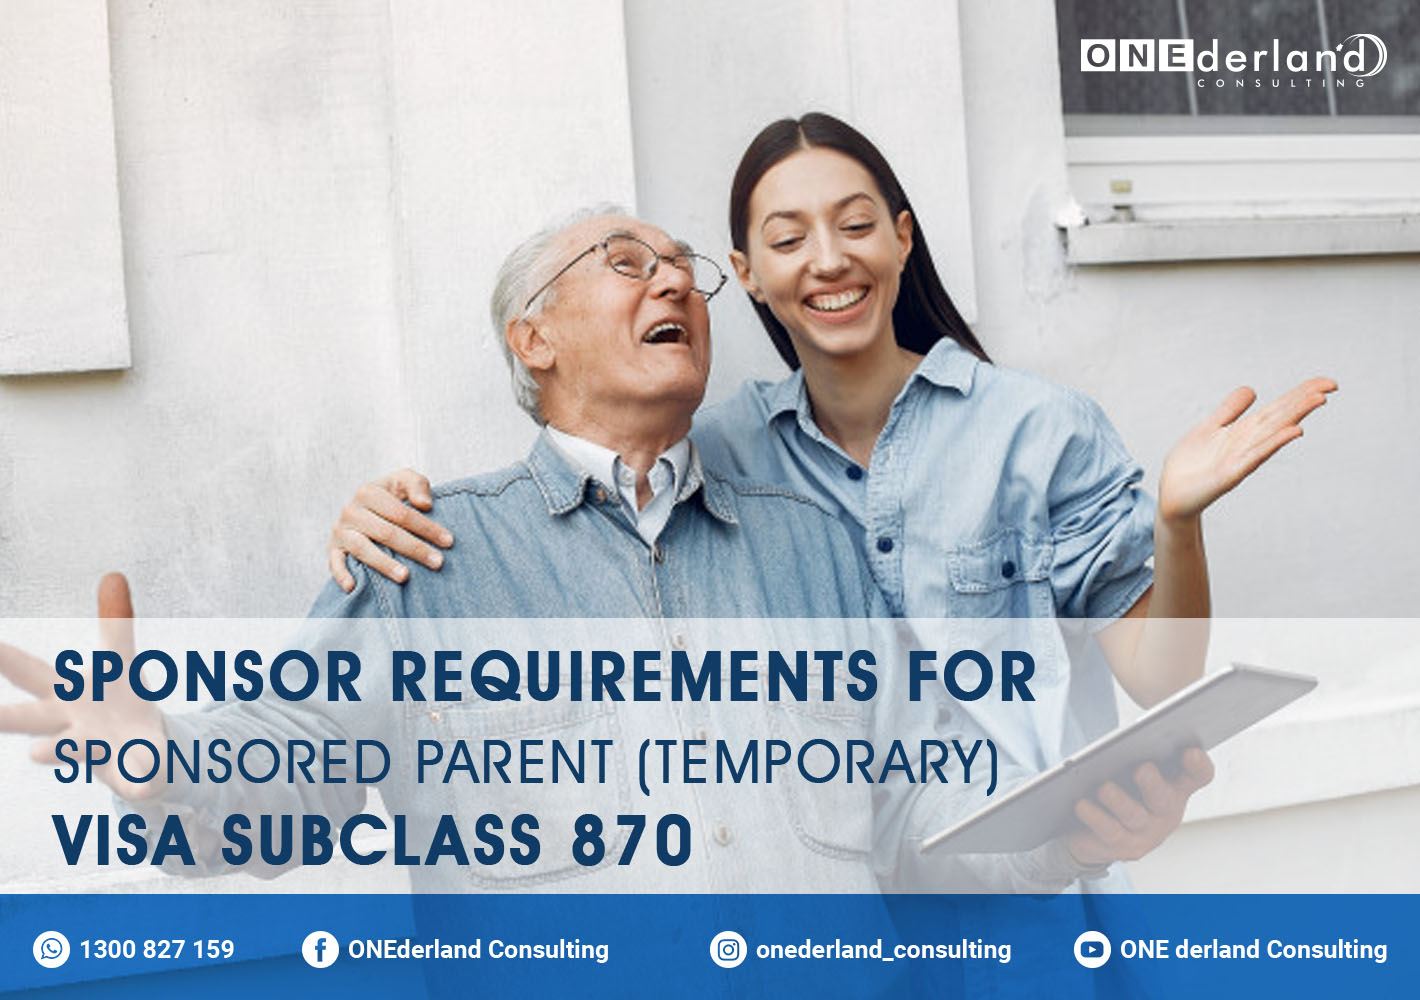 Sponsor Requirements for Sponsored Parent (Temporary) Visa Subclass 870